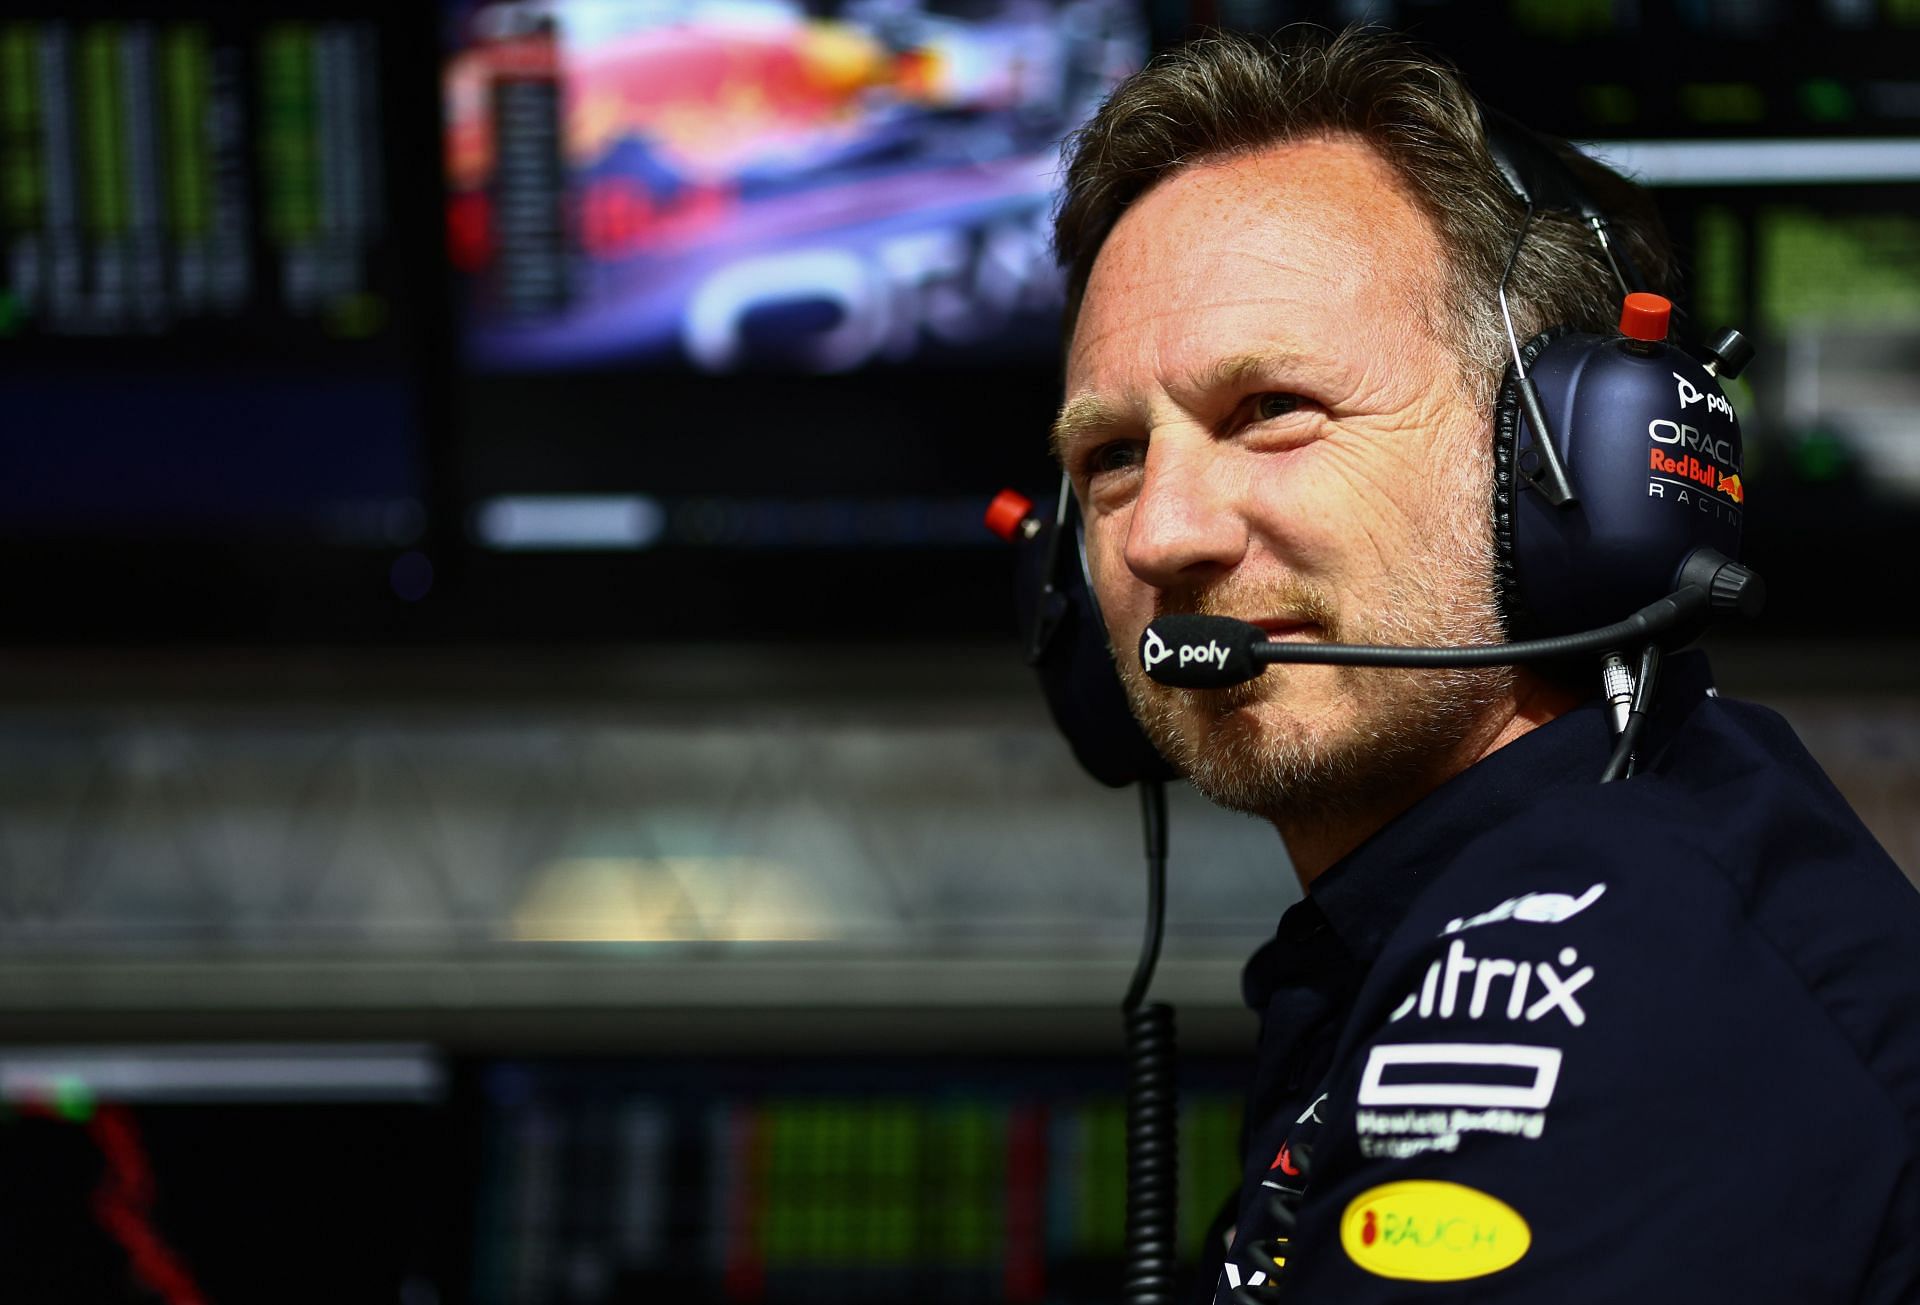 Red Bull team principal Christian Horner during the 2022 Saudi Arabian GP weekend (Photo by Mark Thompson/Getty Images)